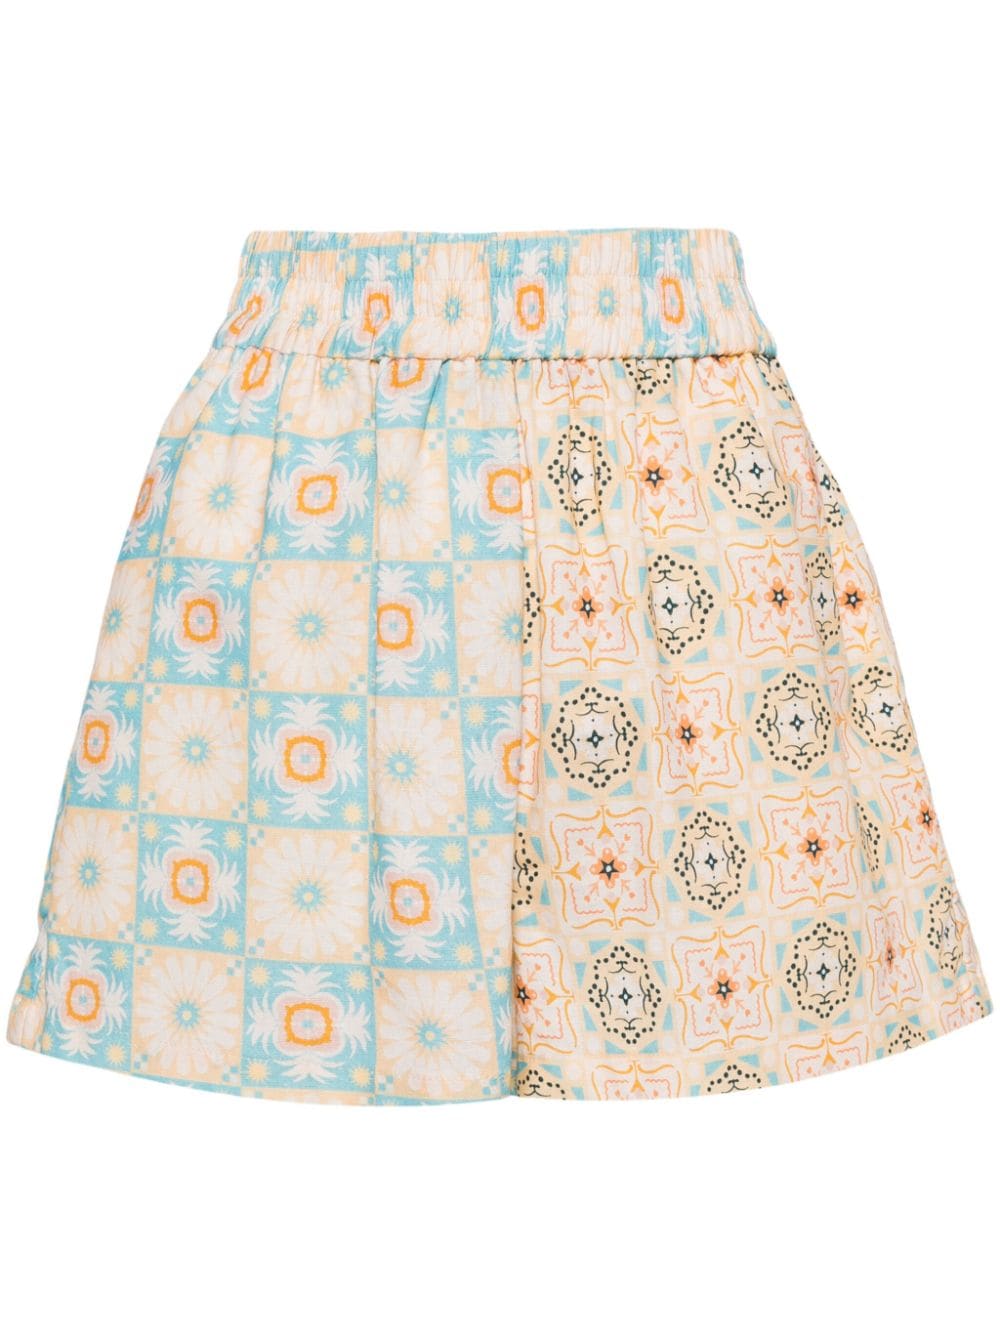 NEVER FULLY DRESSED Shorts mit Print - Blau von NEVER FULLY DRESSED